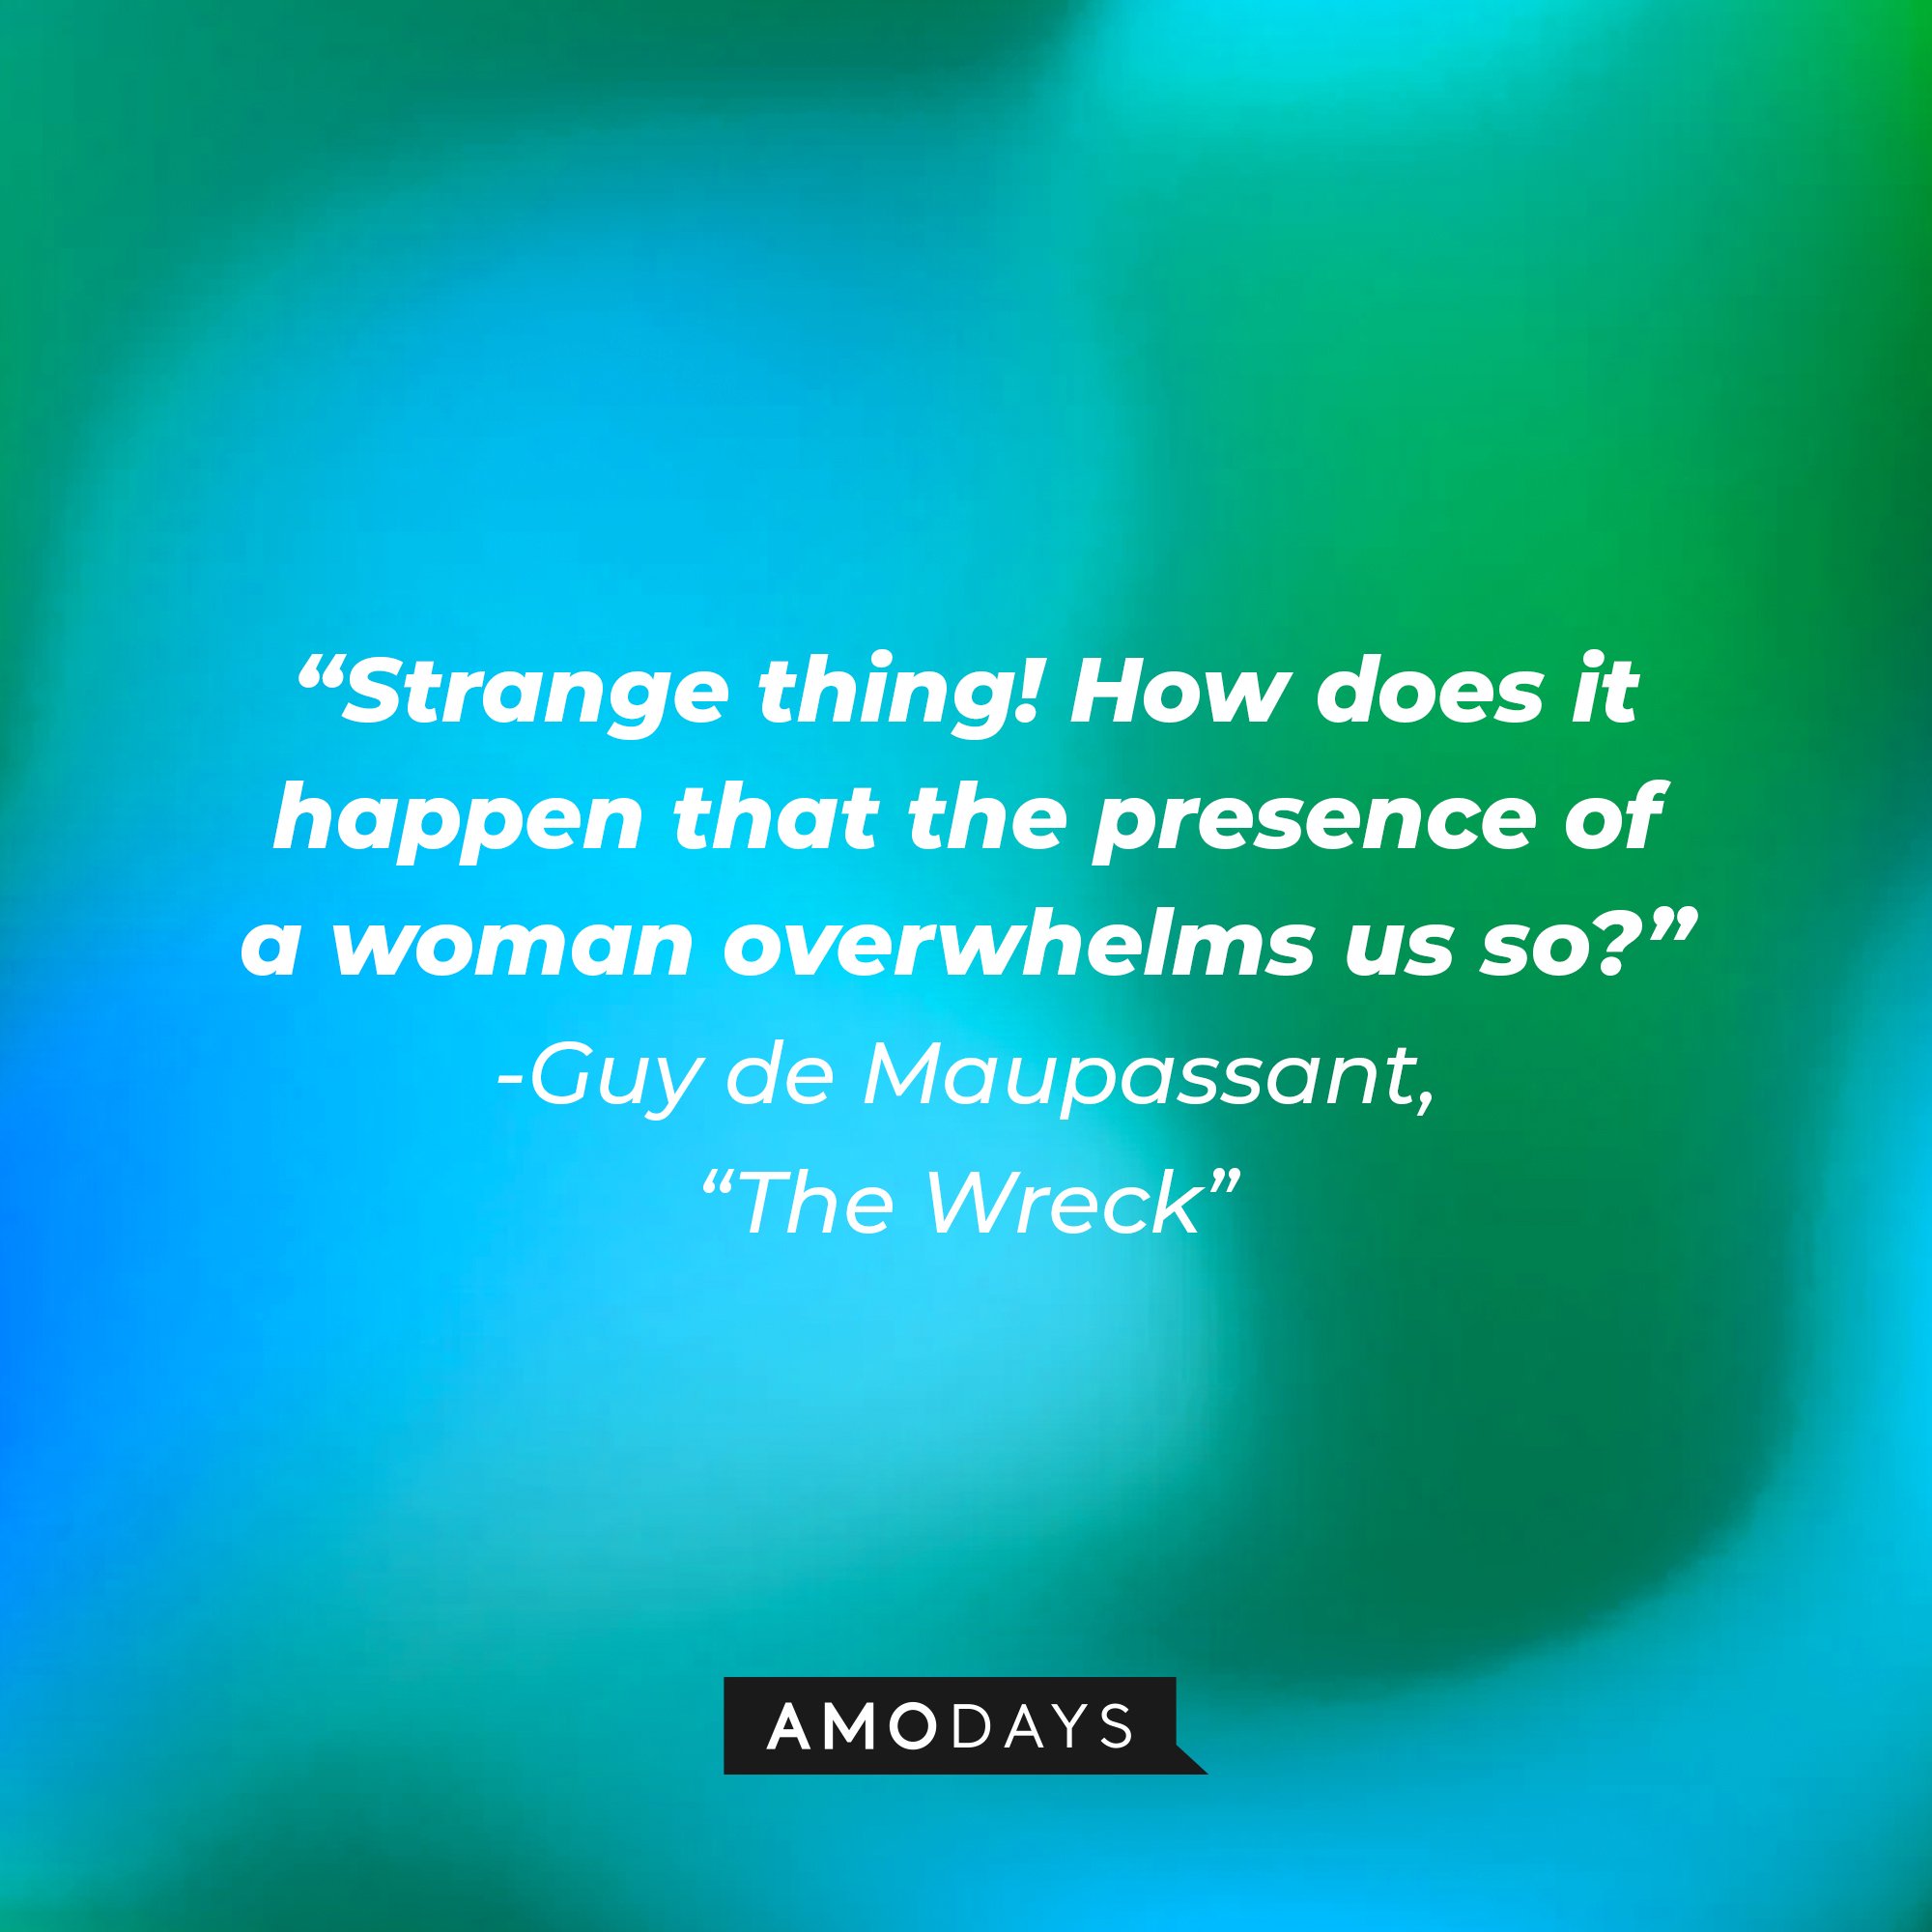 Guy de Maupassant,’s quote from: “The Wreck" Strange thing! How does it happen that the presence of a woman overwhelms us so?" | Image: AmoDays